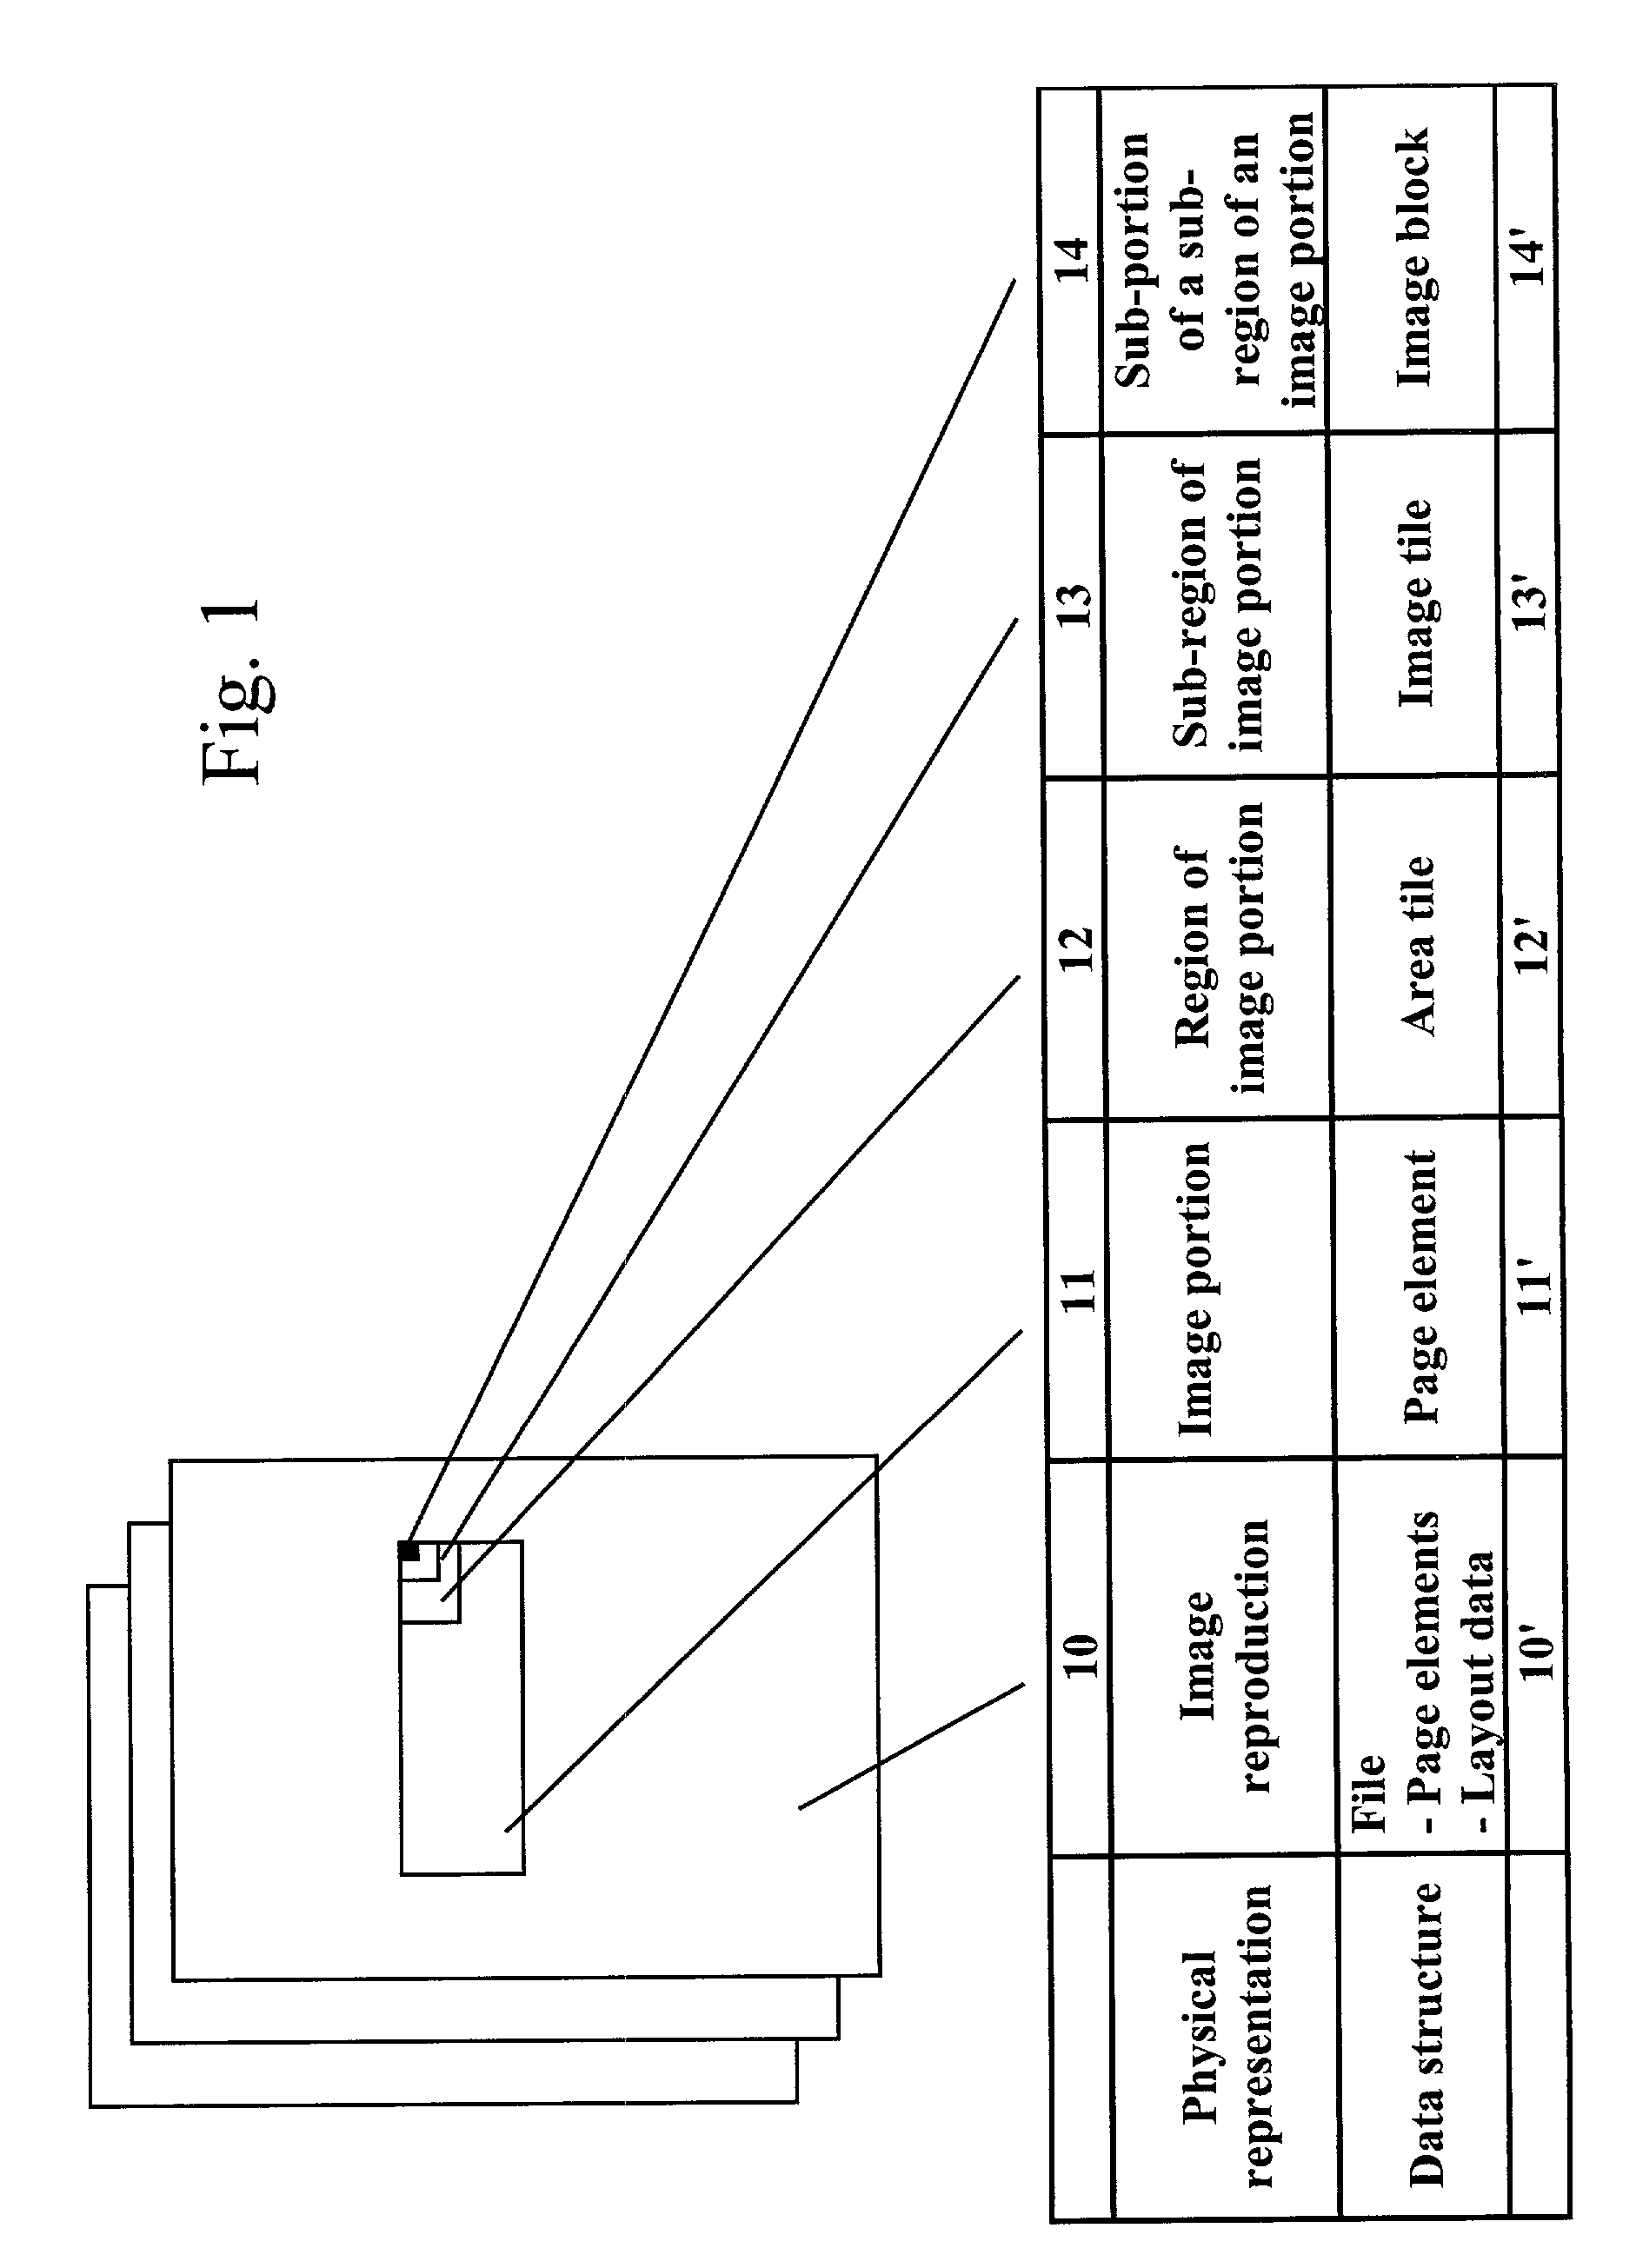 Page composition in an image reproduction system using segmented page elements